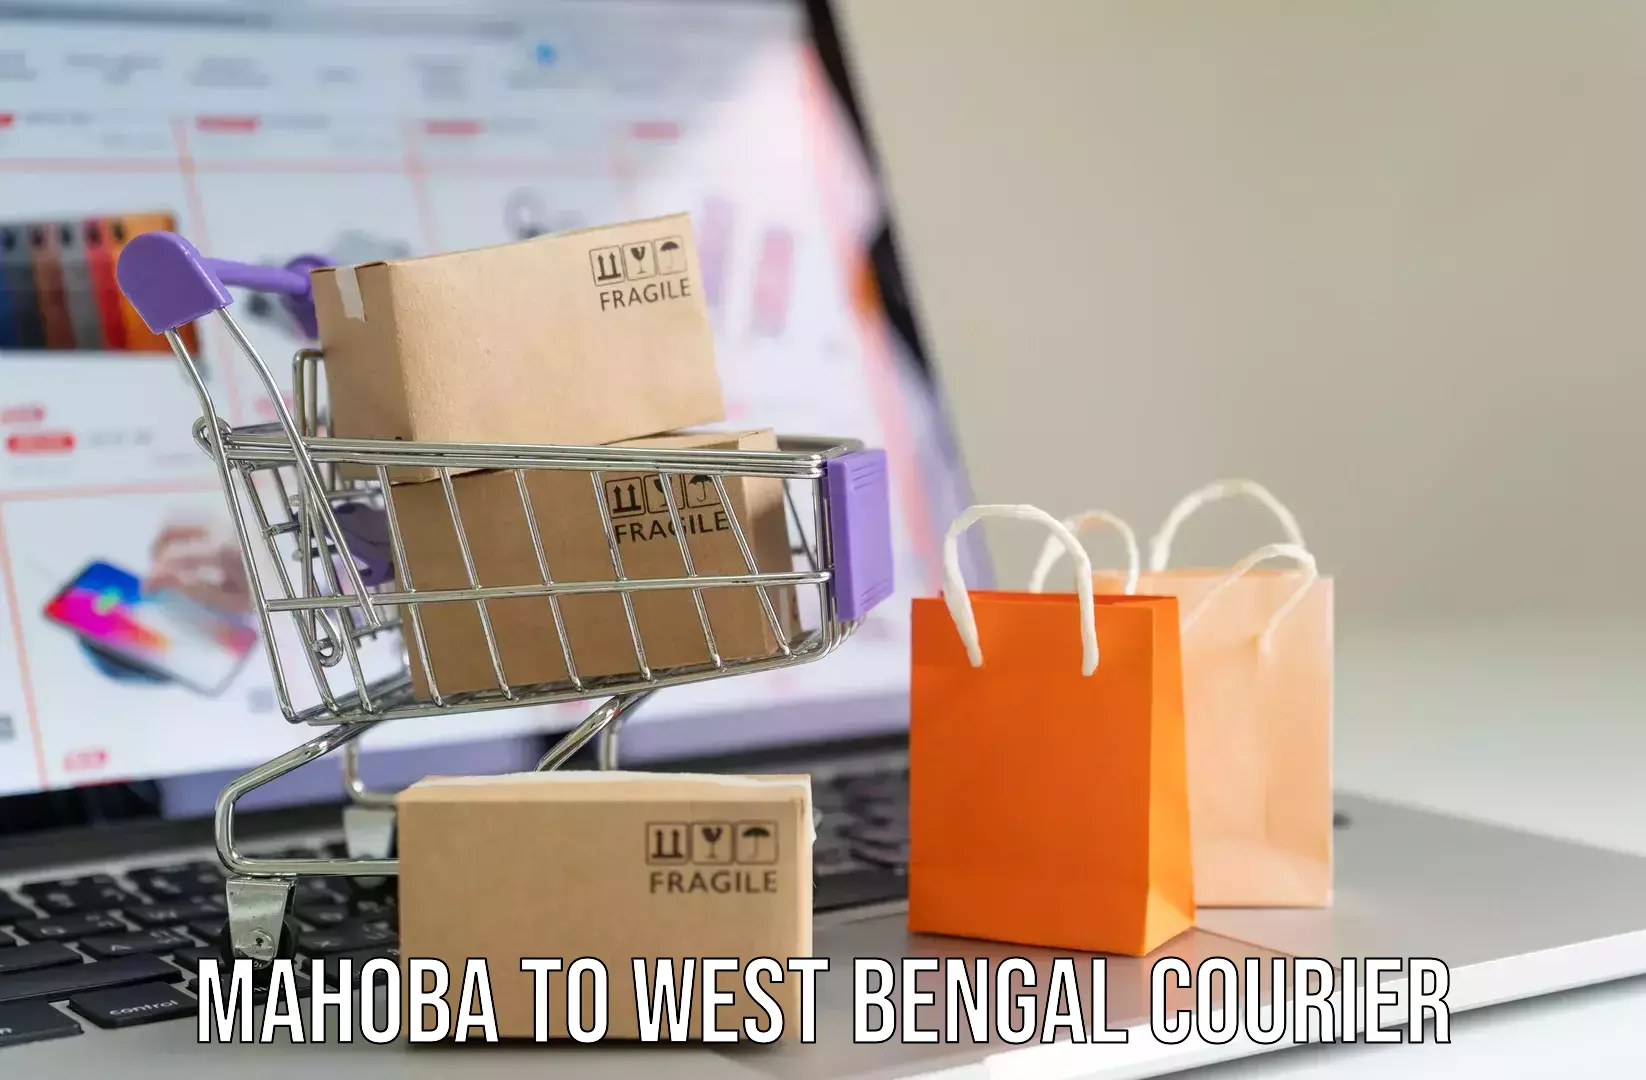 Luggage transport consultancy Mahoba to West Bengal